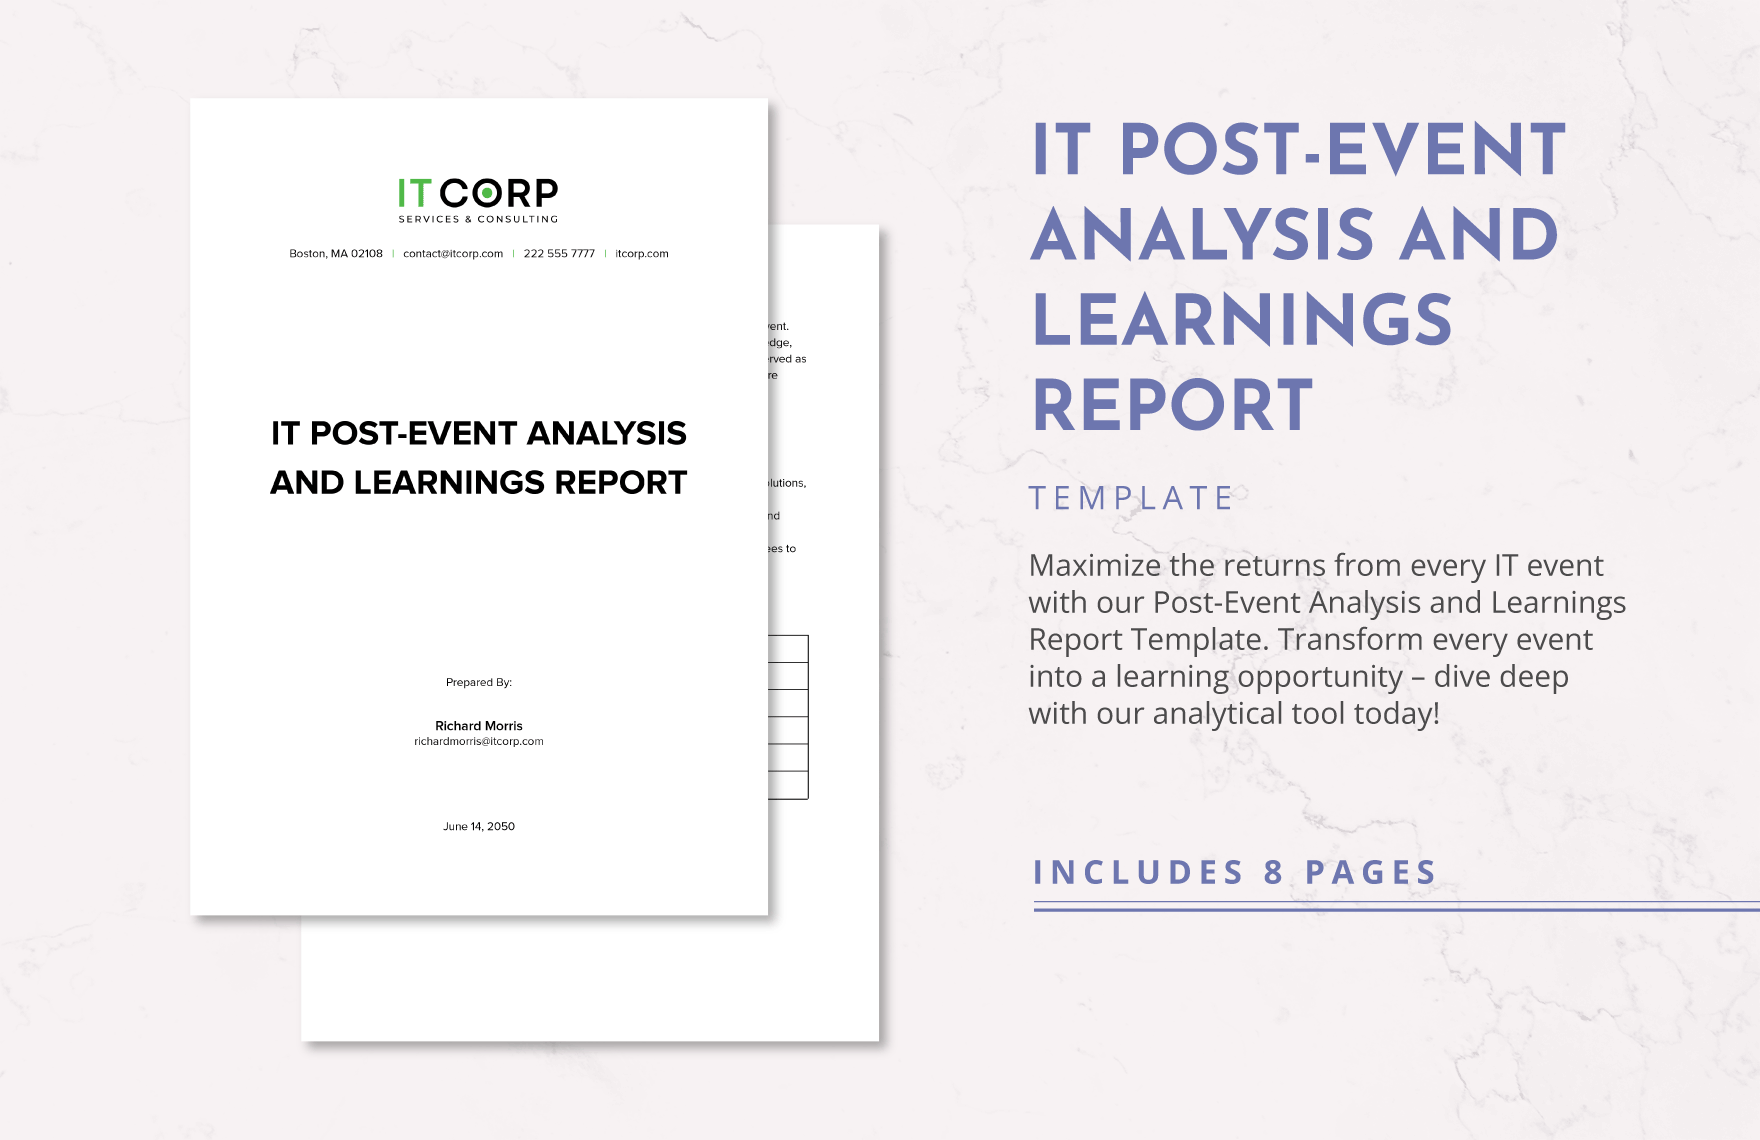 IT Post-Event Analysis and Learnings Report Template